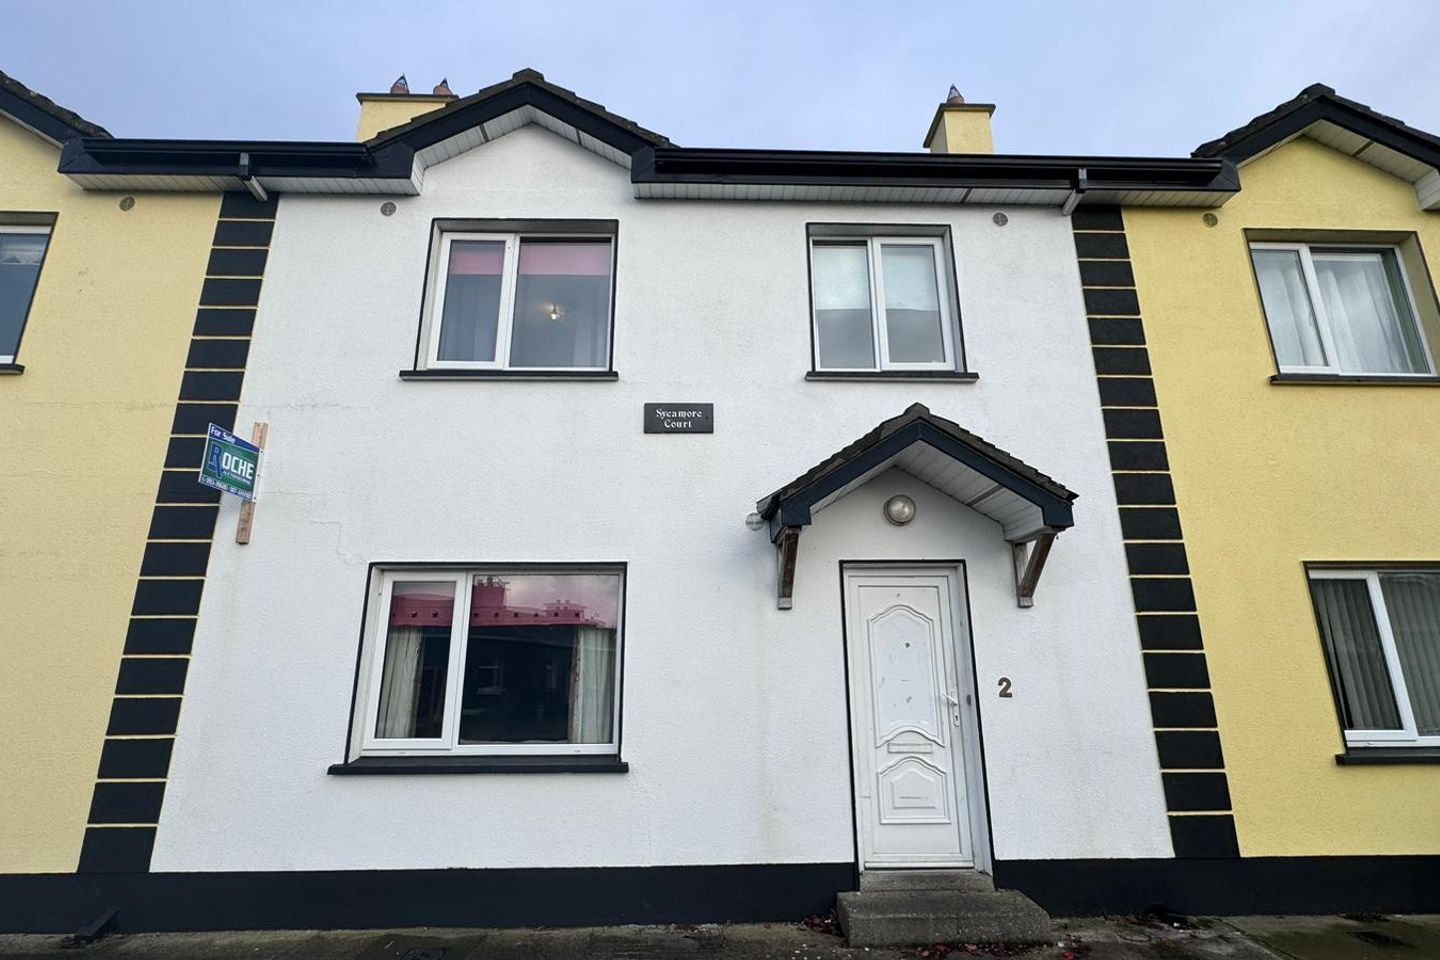 2 Sycamore Court, Old Church Road, Williamstown, Co. Galway, F45RC63